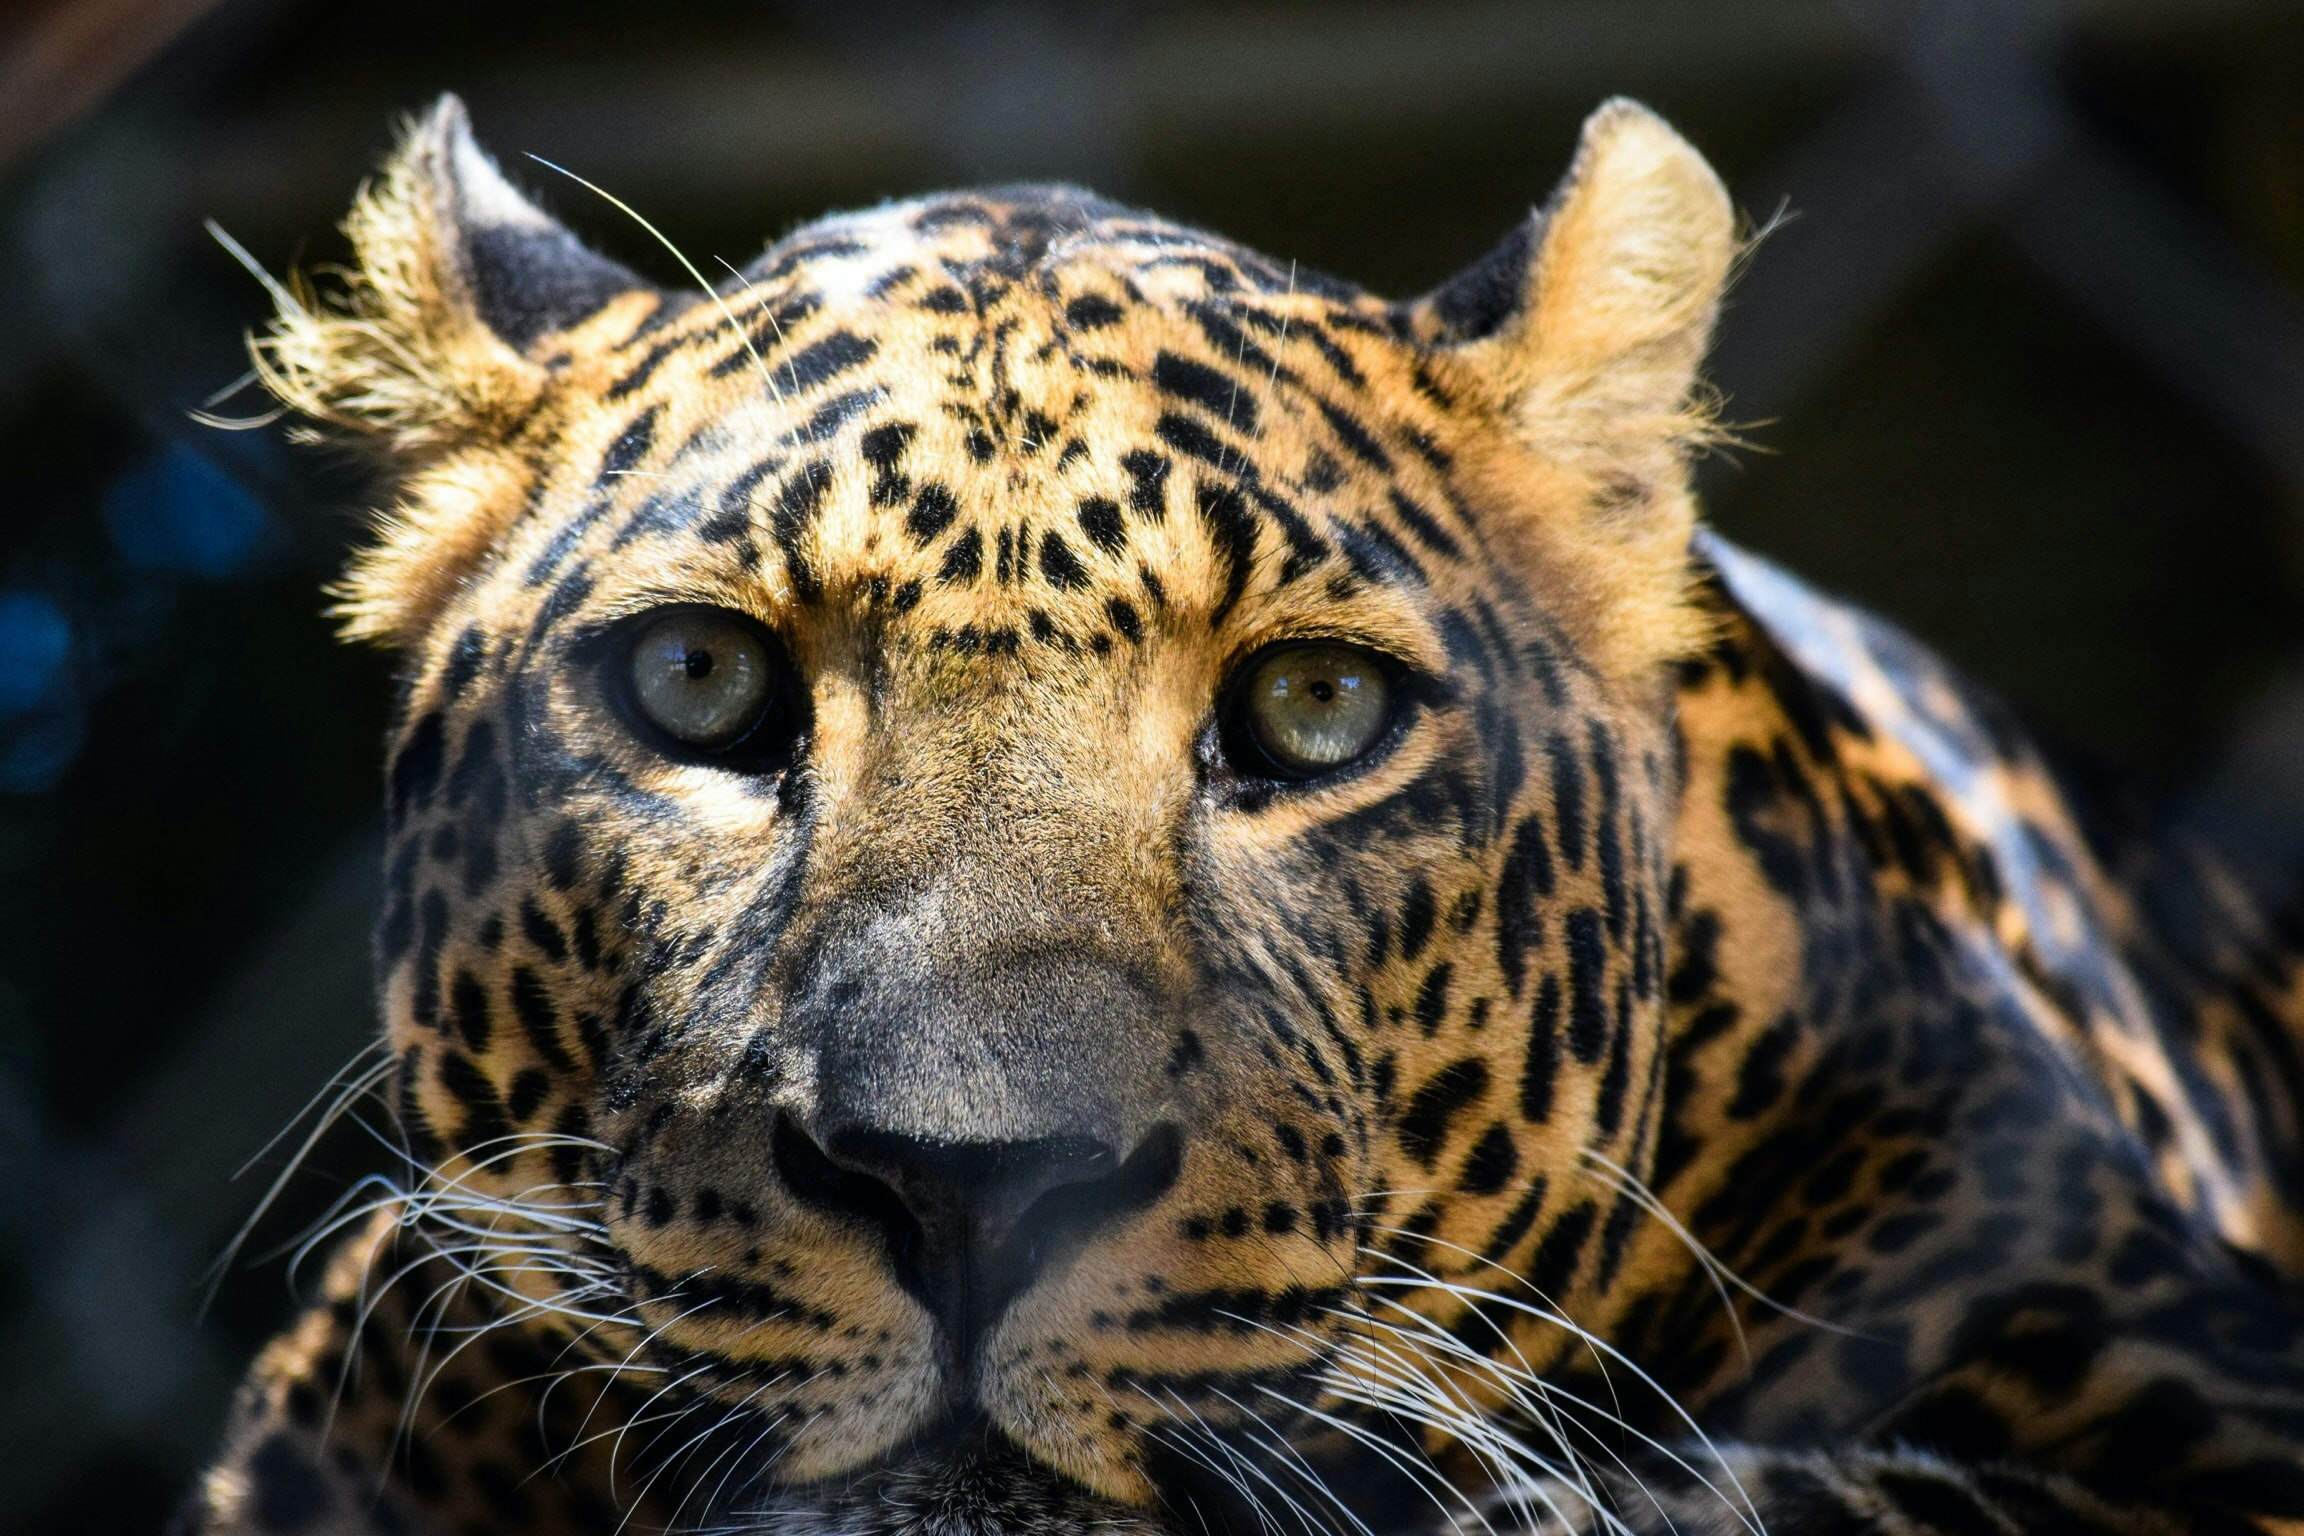 A leopard looking directly at the camera